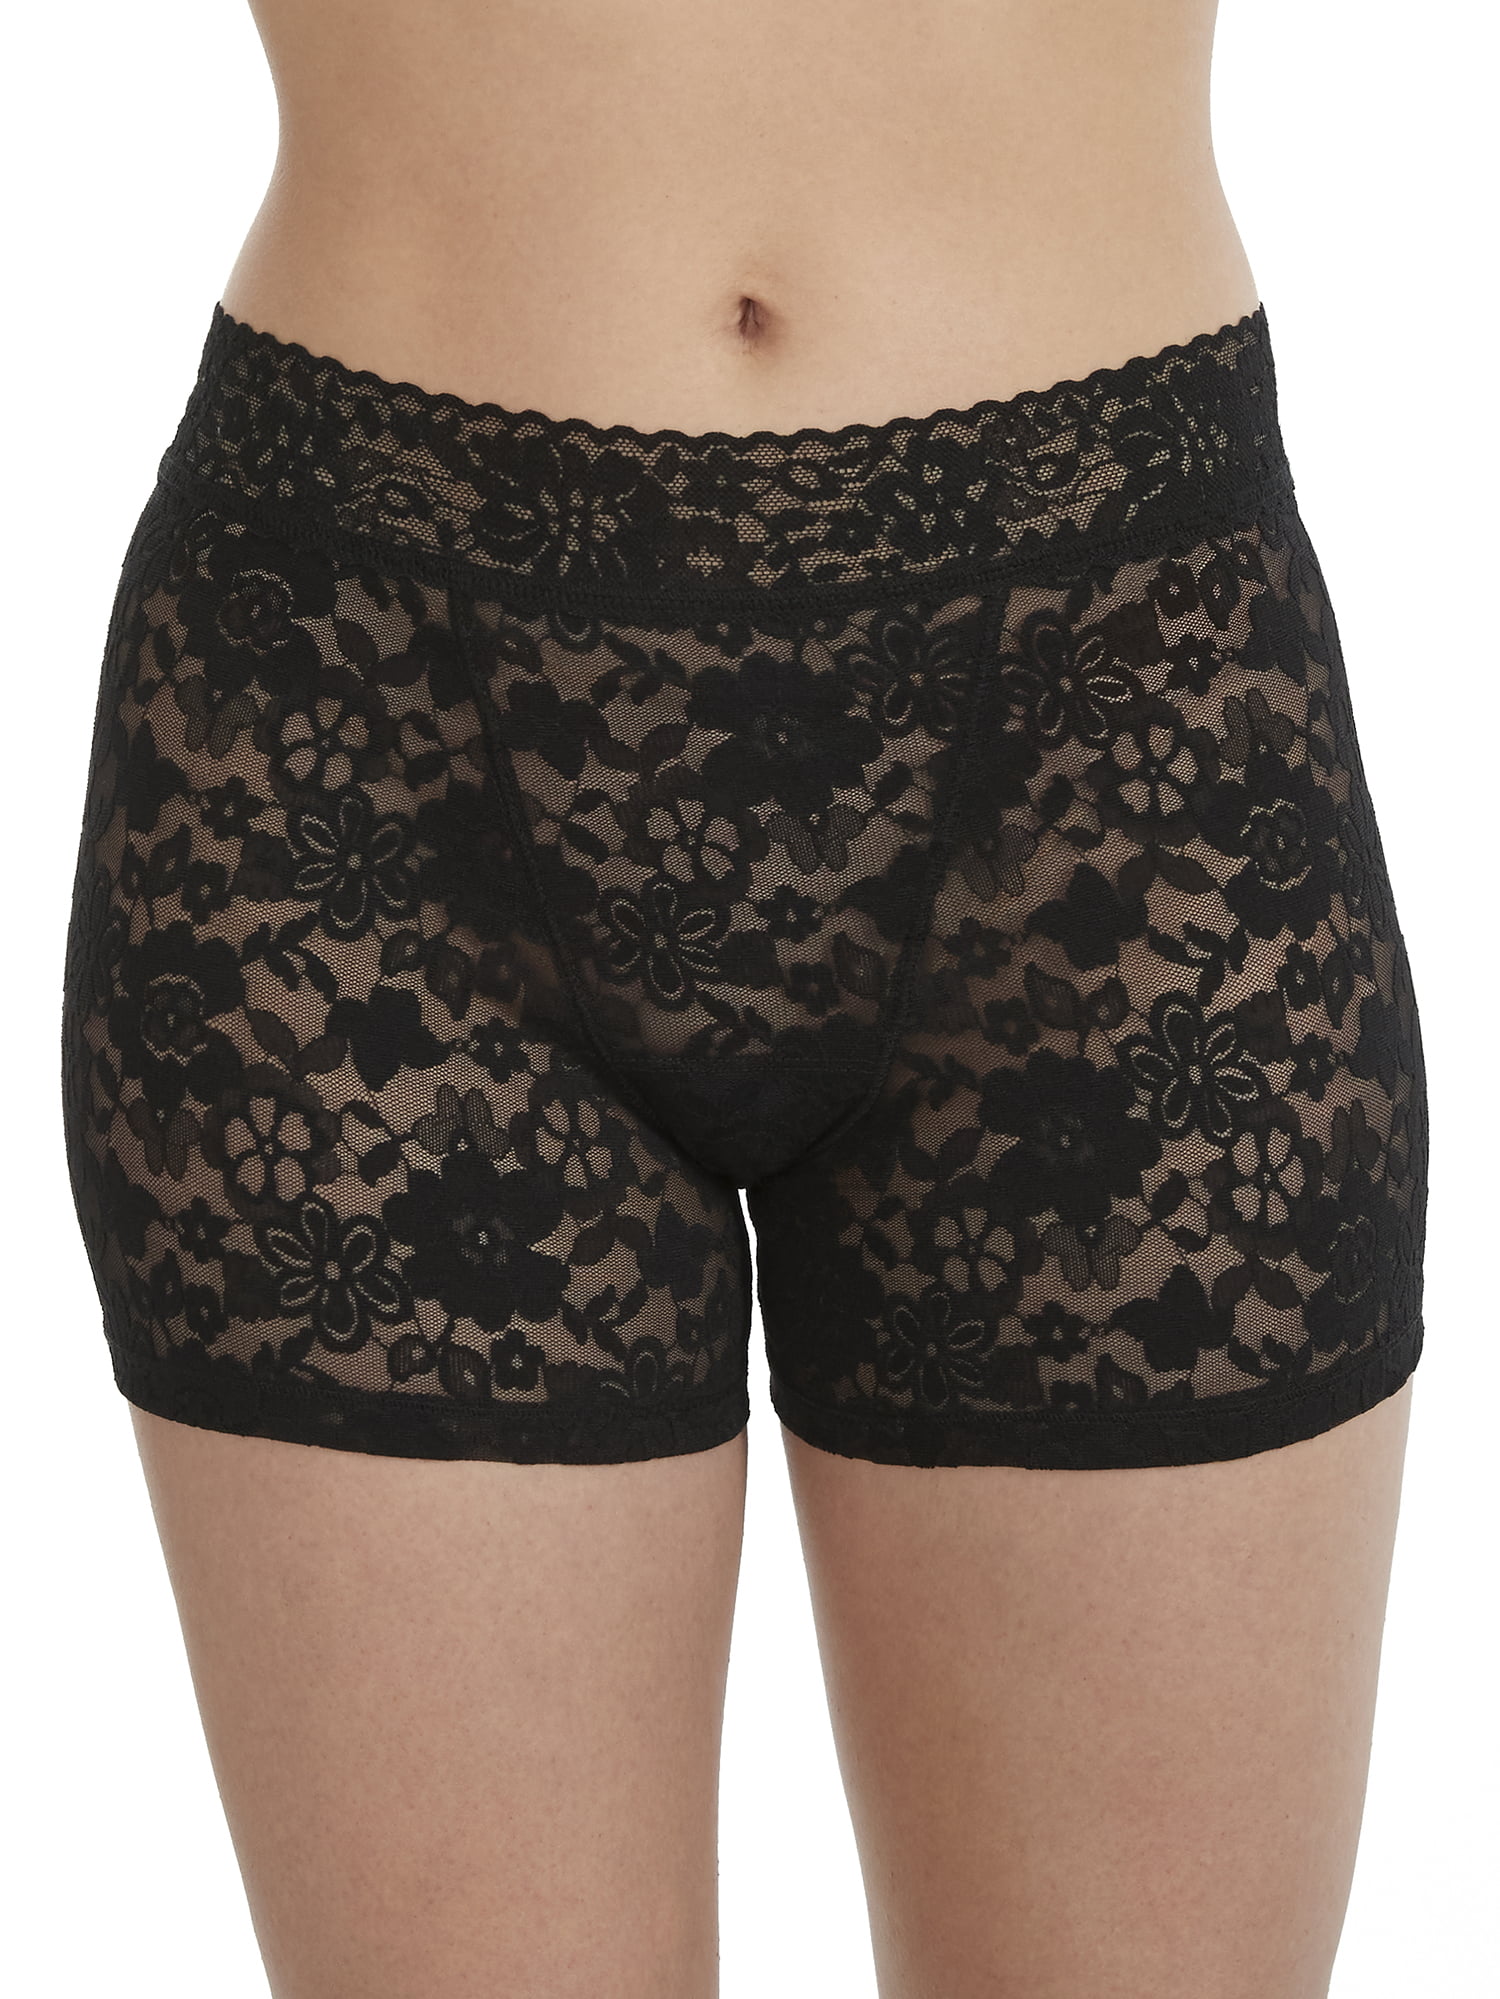 Hanky Panky Womens Daily Lace Boxer Brief Style-771252P